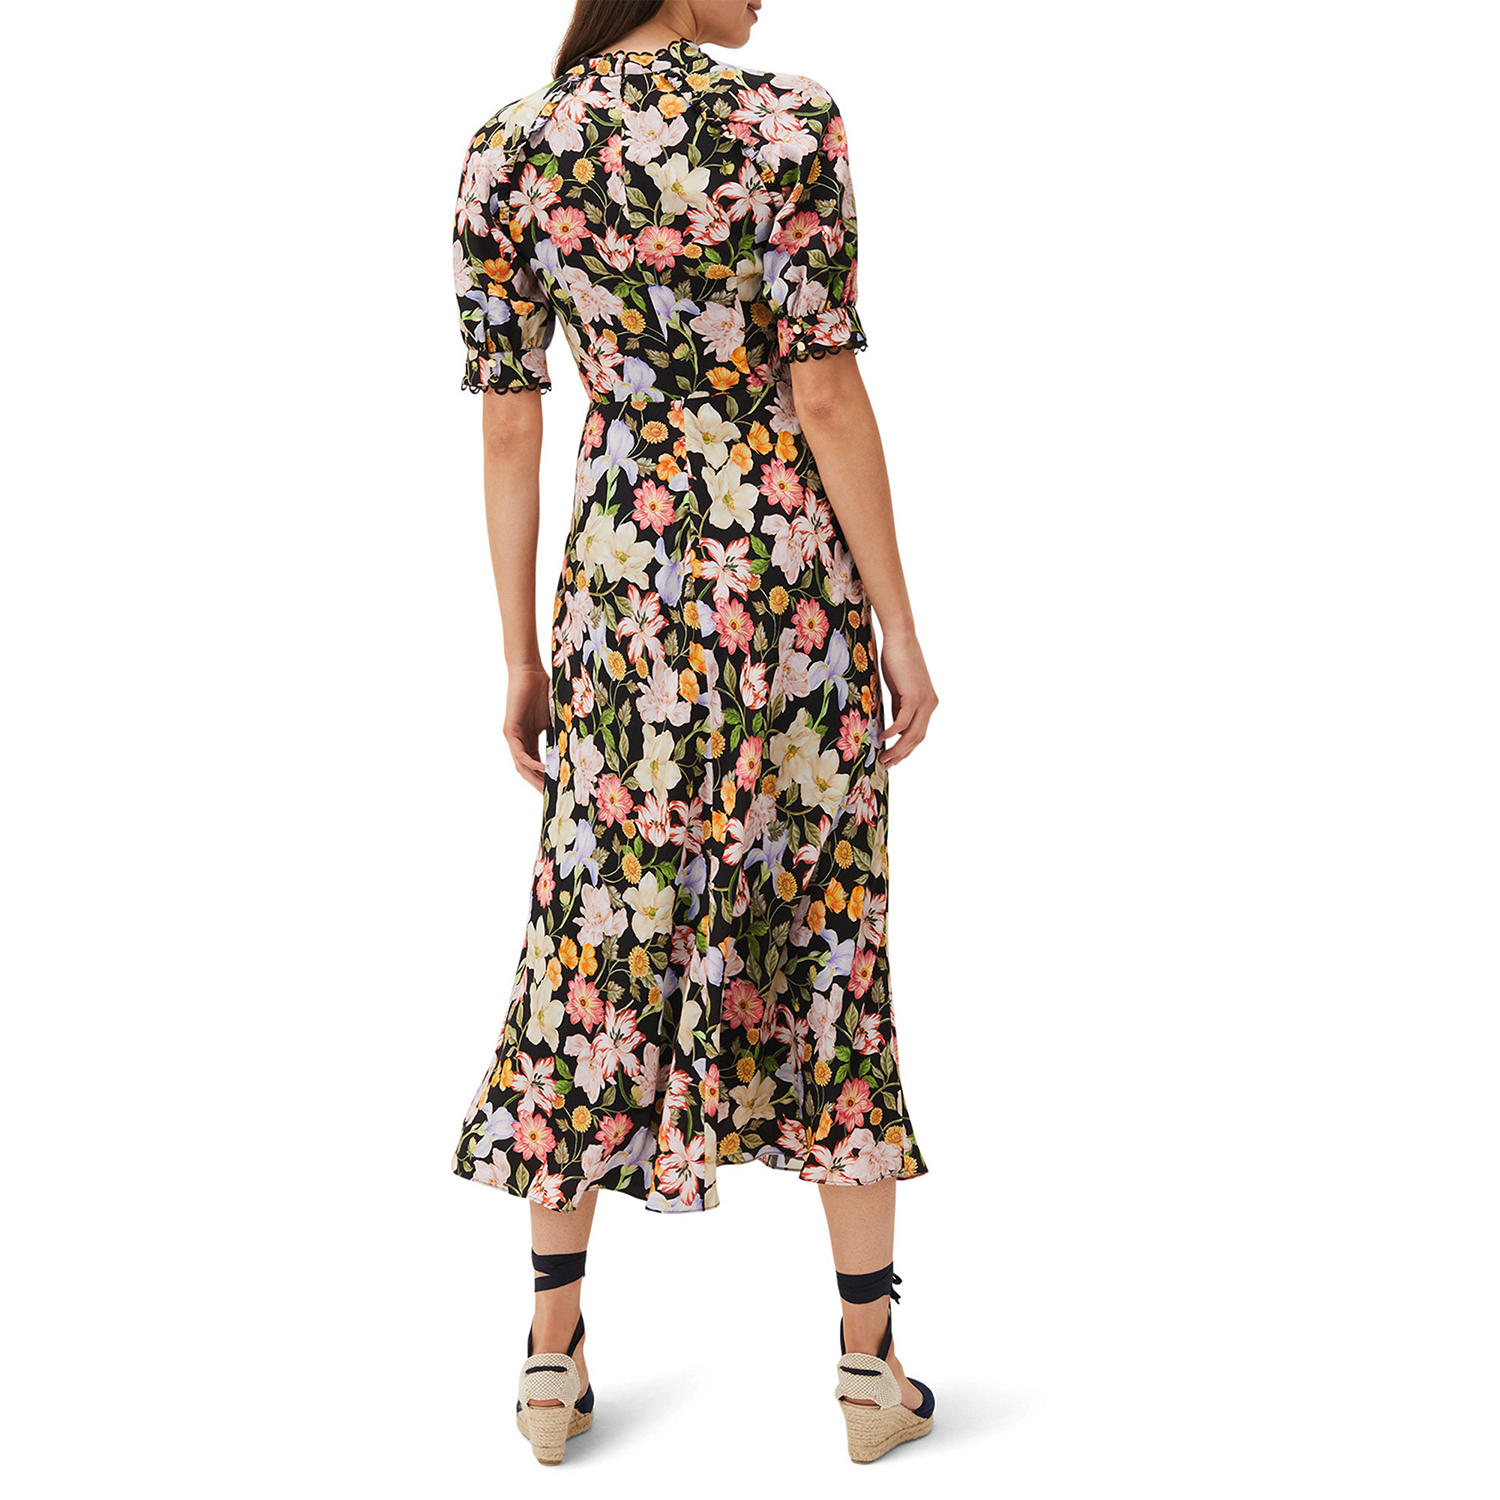 Penelope Puff Sleeve Floral Dress